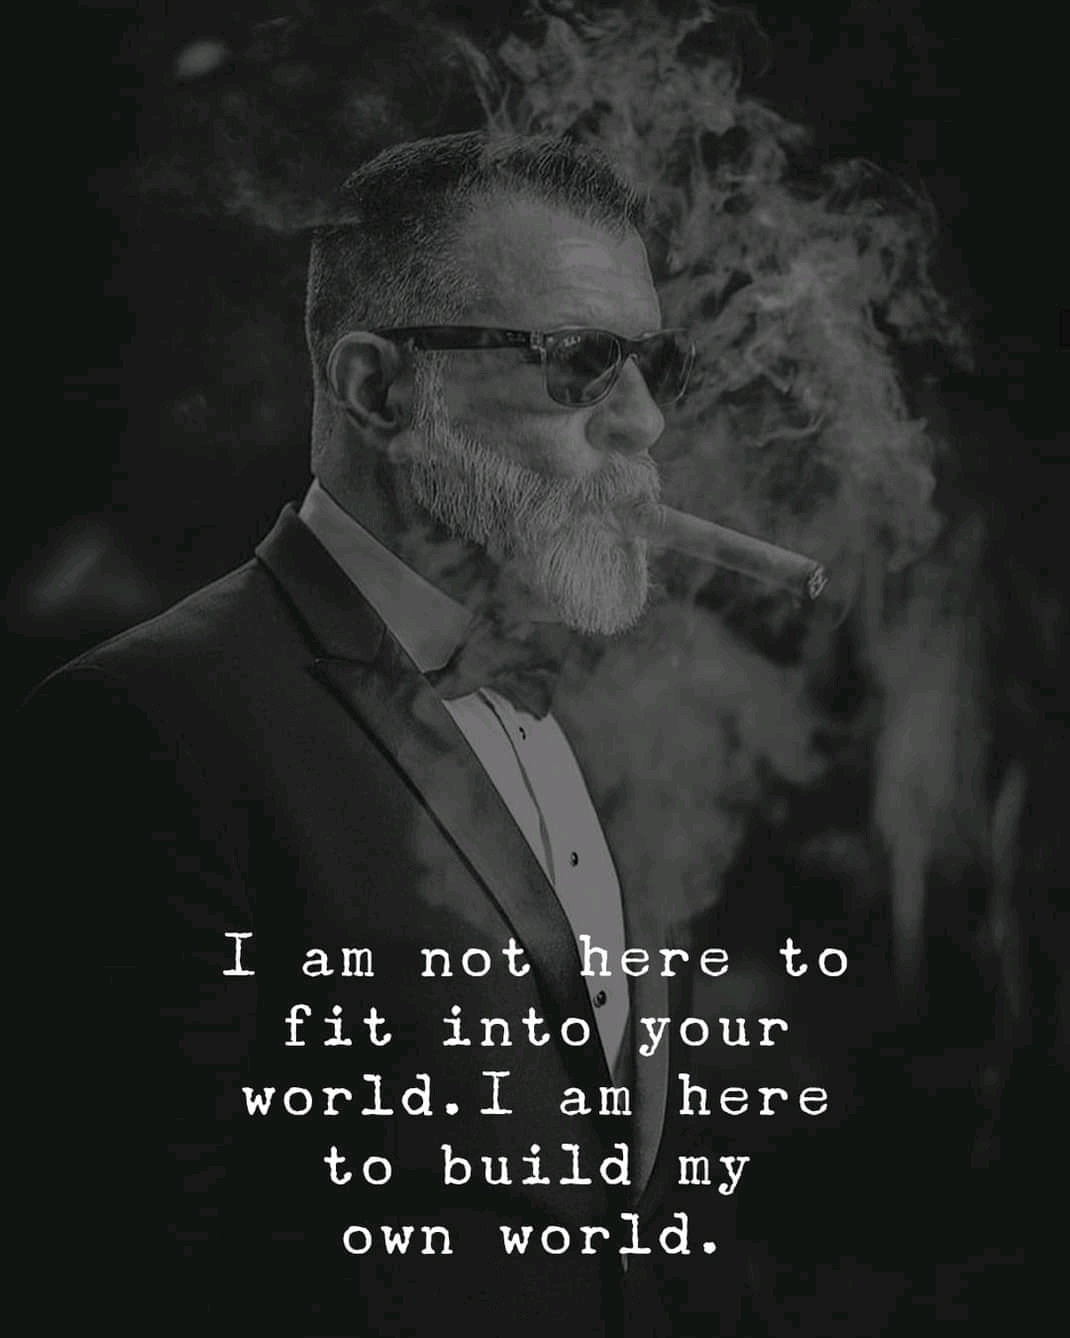 I’m not here to fit into your world. I’m here to build my own world.